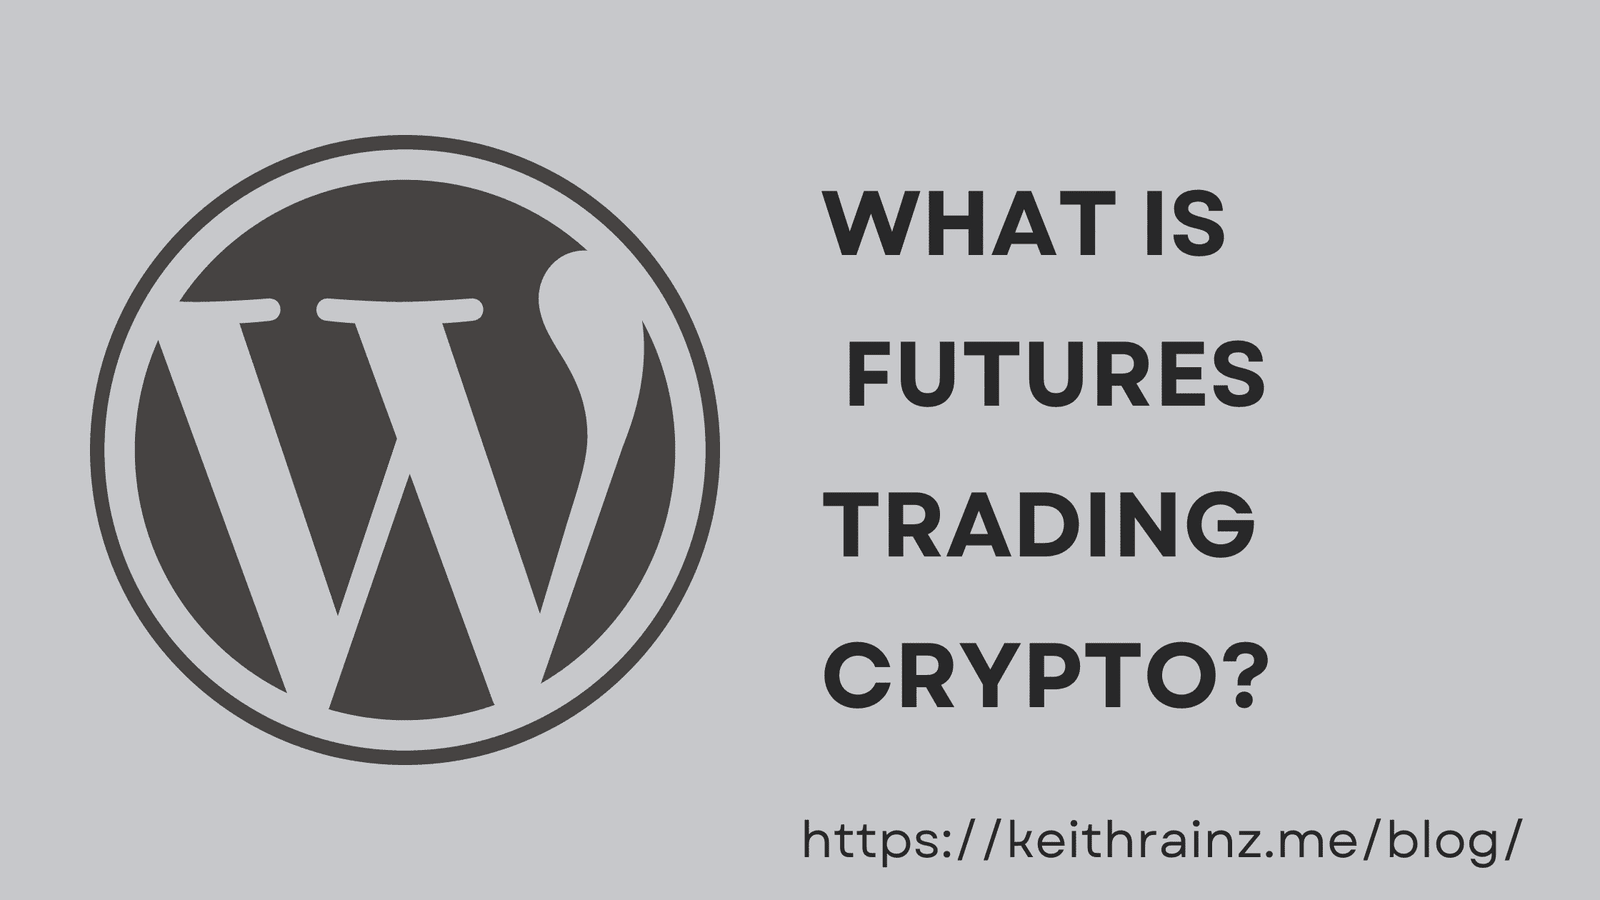 What is Futures Trading Crypto